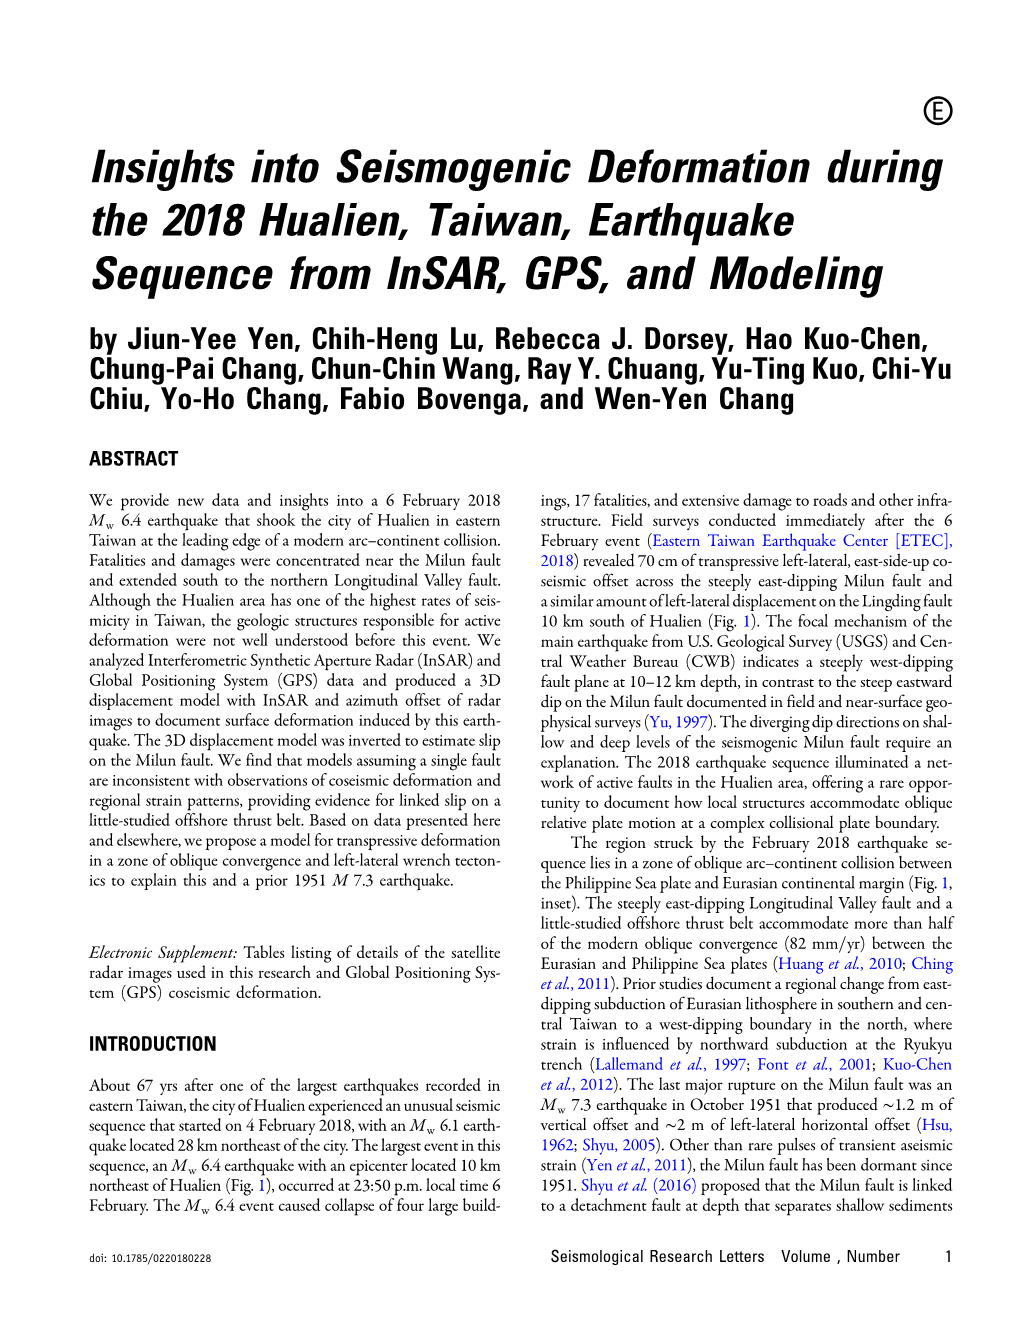 Insights Into Seismogenic Deformation During the 2018 Hualien, Taiwan, Earthquake Sequence from Insar, GPS, and Modeling by Jiun-Yee Yen, Chih-Heng Lu, Rebecca J